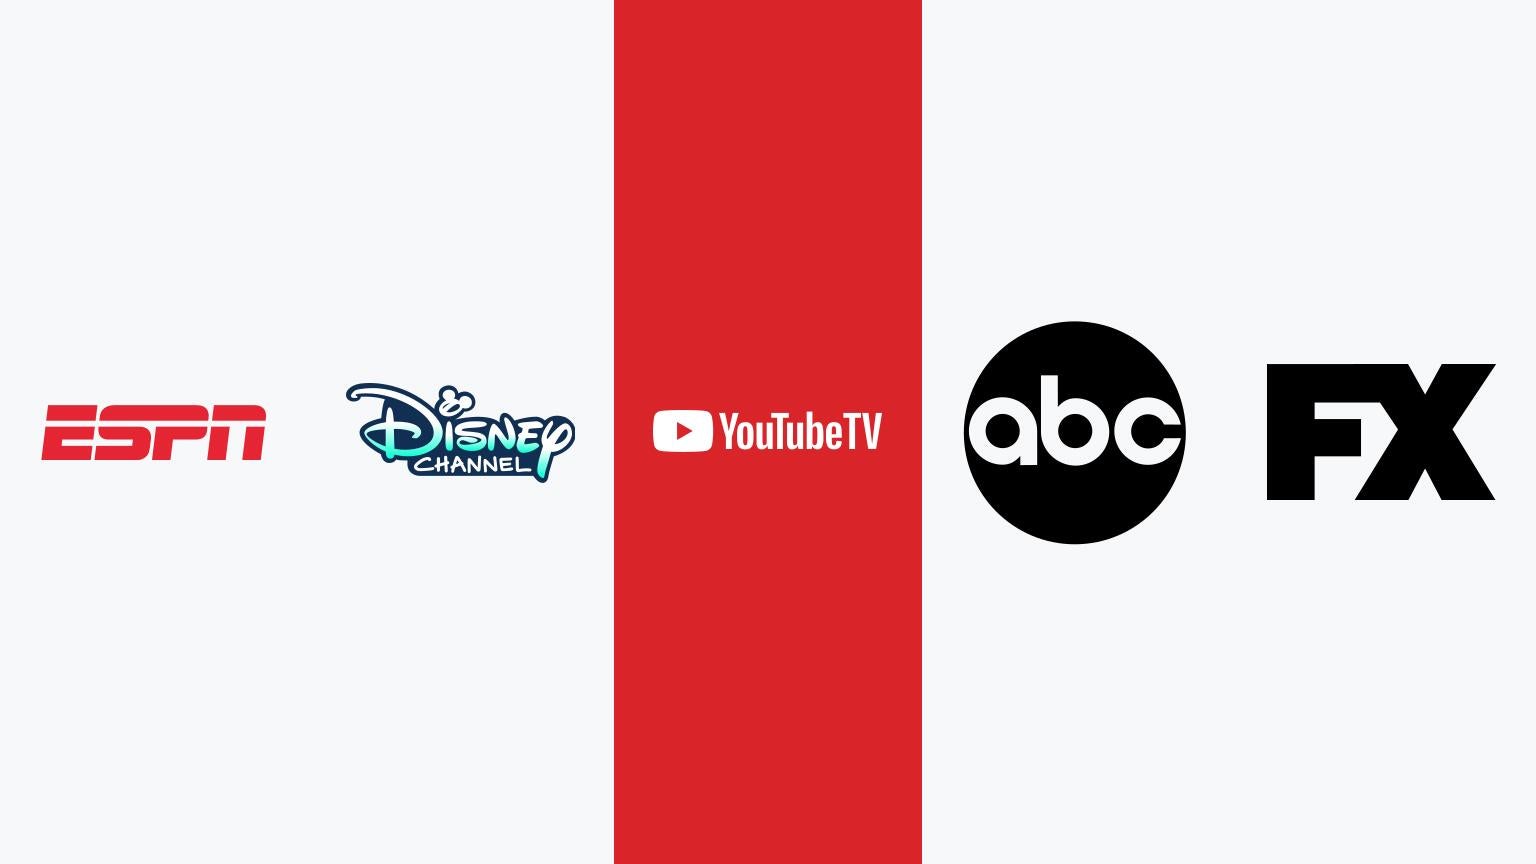 YouTube TV Drops Disney-Owned Channels Including ESPN, Disney Channel, & ABC  – The Streamable